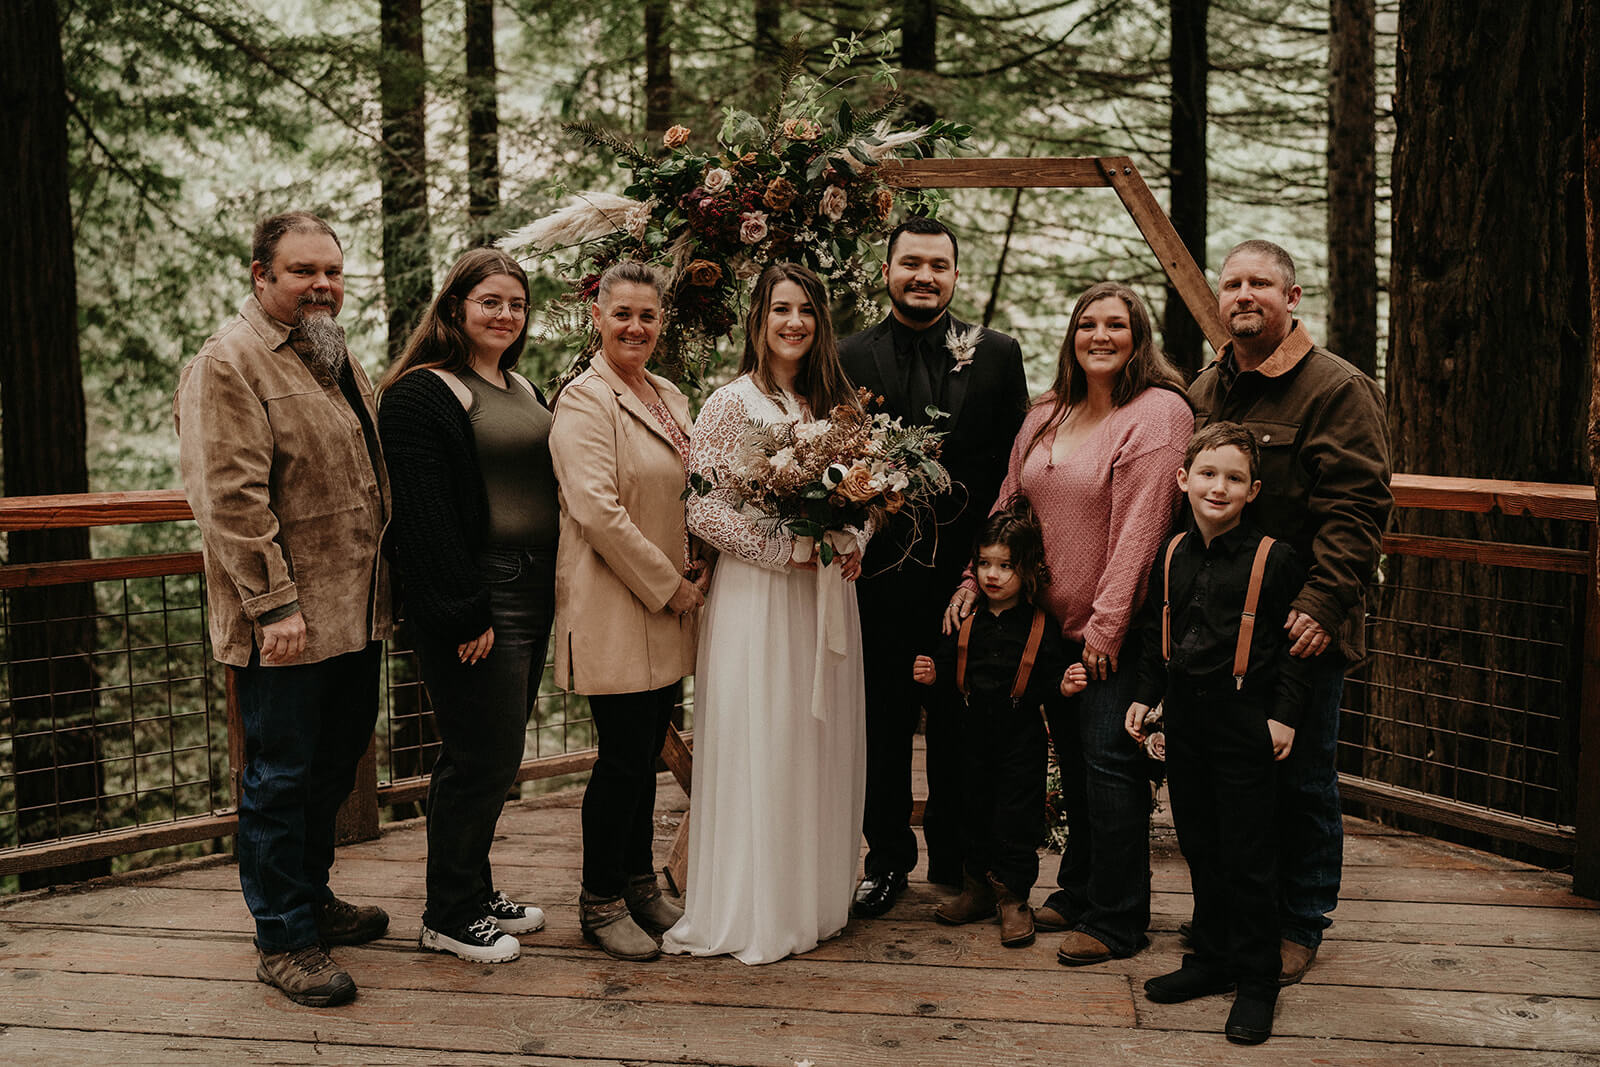 Wedding portraits in the forest